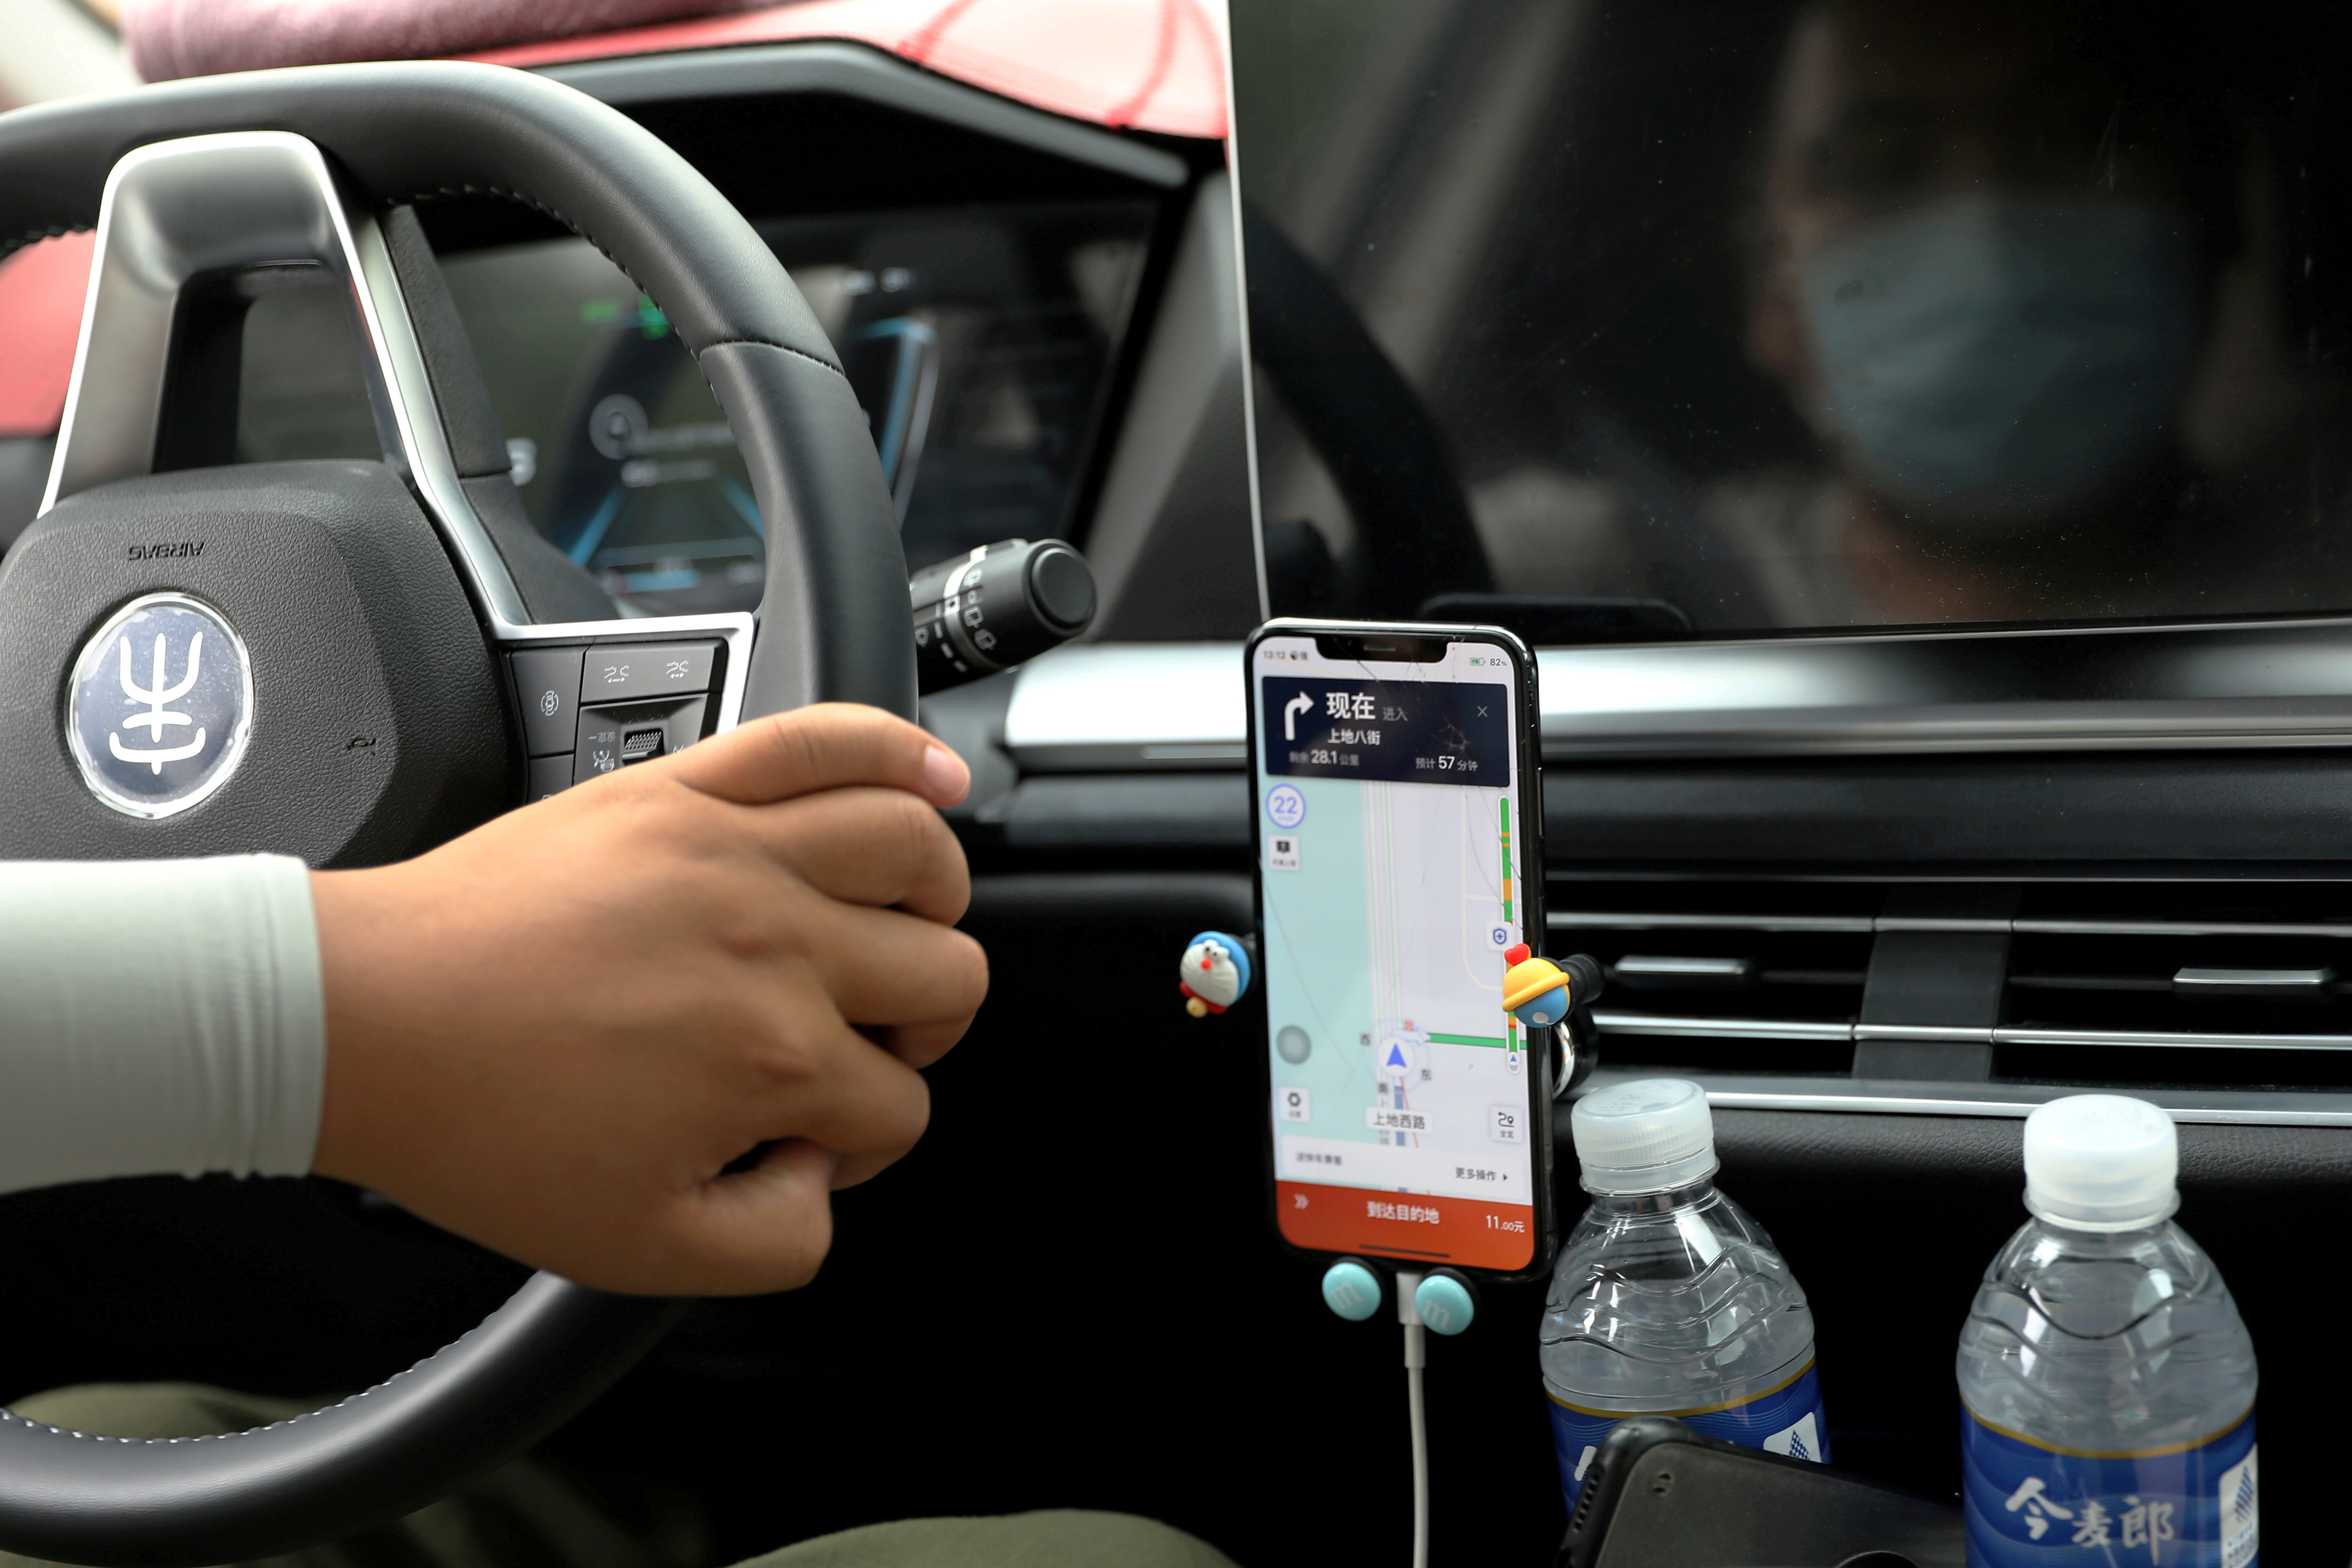 Driver of Chinese ride-hailing service Didi drives with a phone showing a navigation map on Didi's app, in Beijing